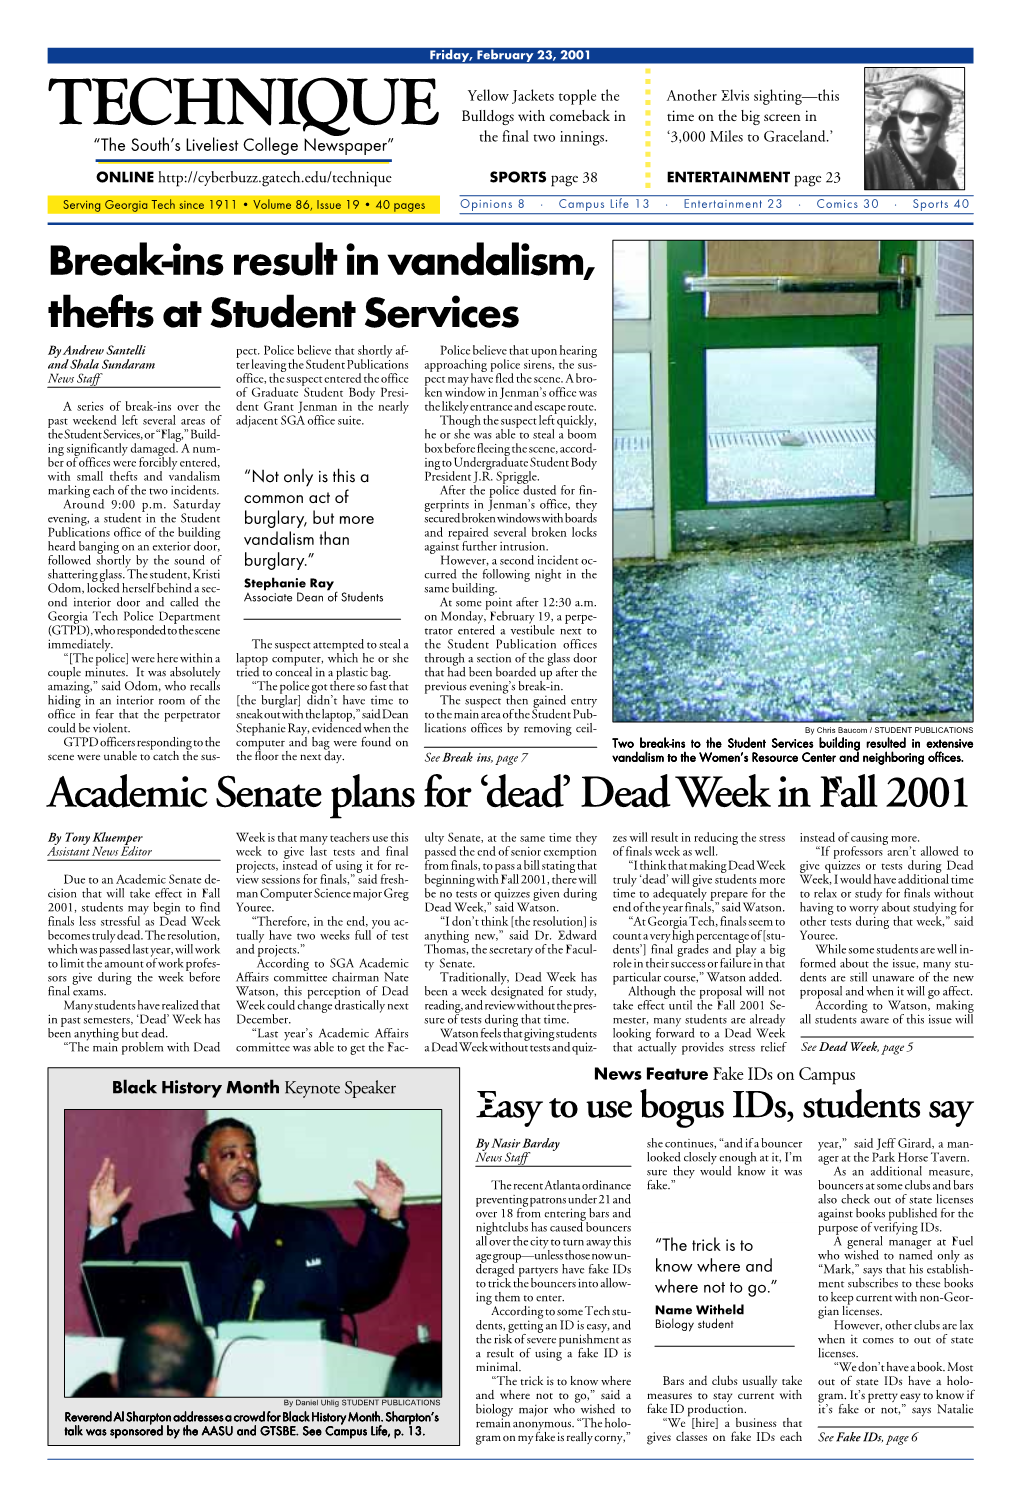 TECHNIQUE Bulldogs with Comeback in Time on the Big Screen in “The South’S Liveliest College Newspaper” the Final Two Innings